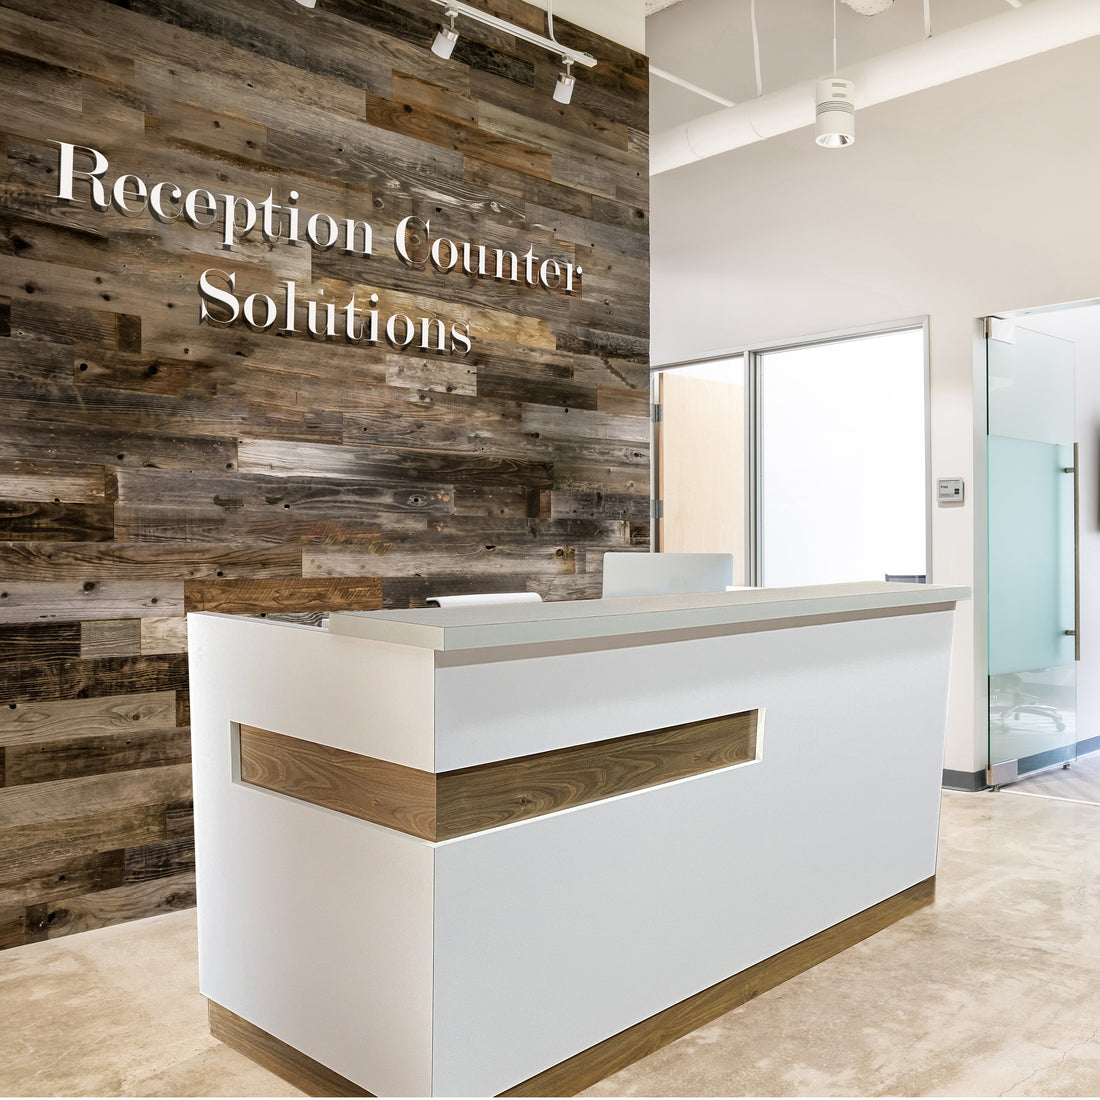 Modern Reception Desk with Reclaimed wood back wall